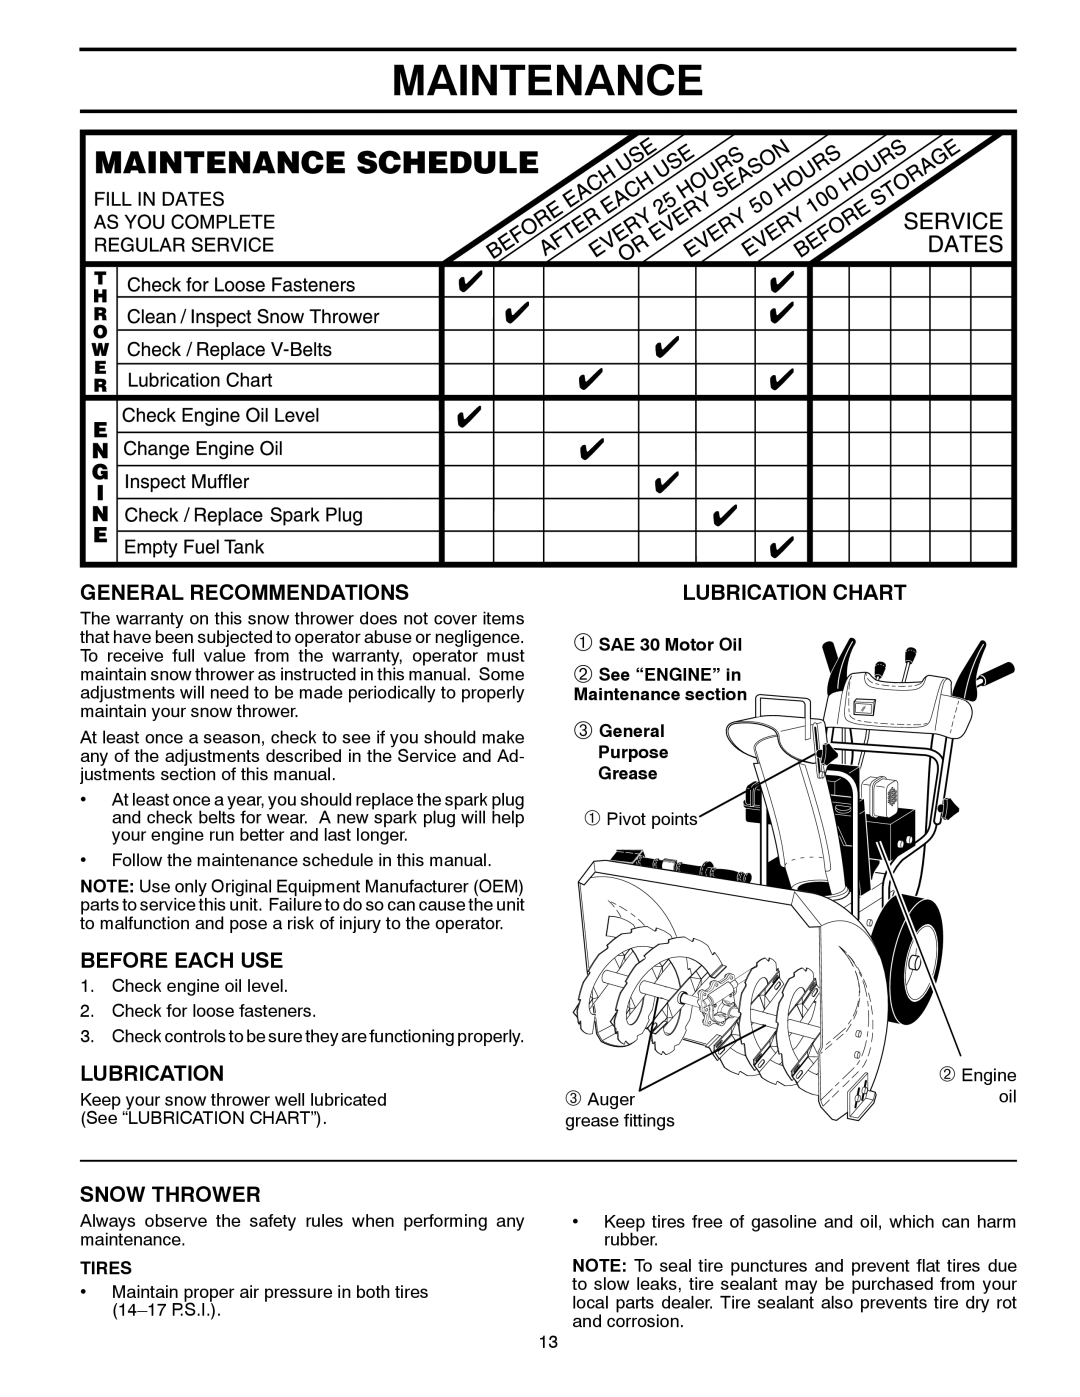 McCulloch 96192004102 Maintenance, General Recommendations, Before Each Use, Snow Thrower, Lubrication Chart, Tires 